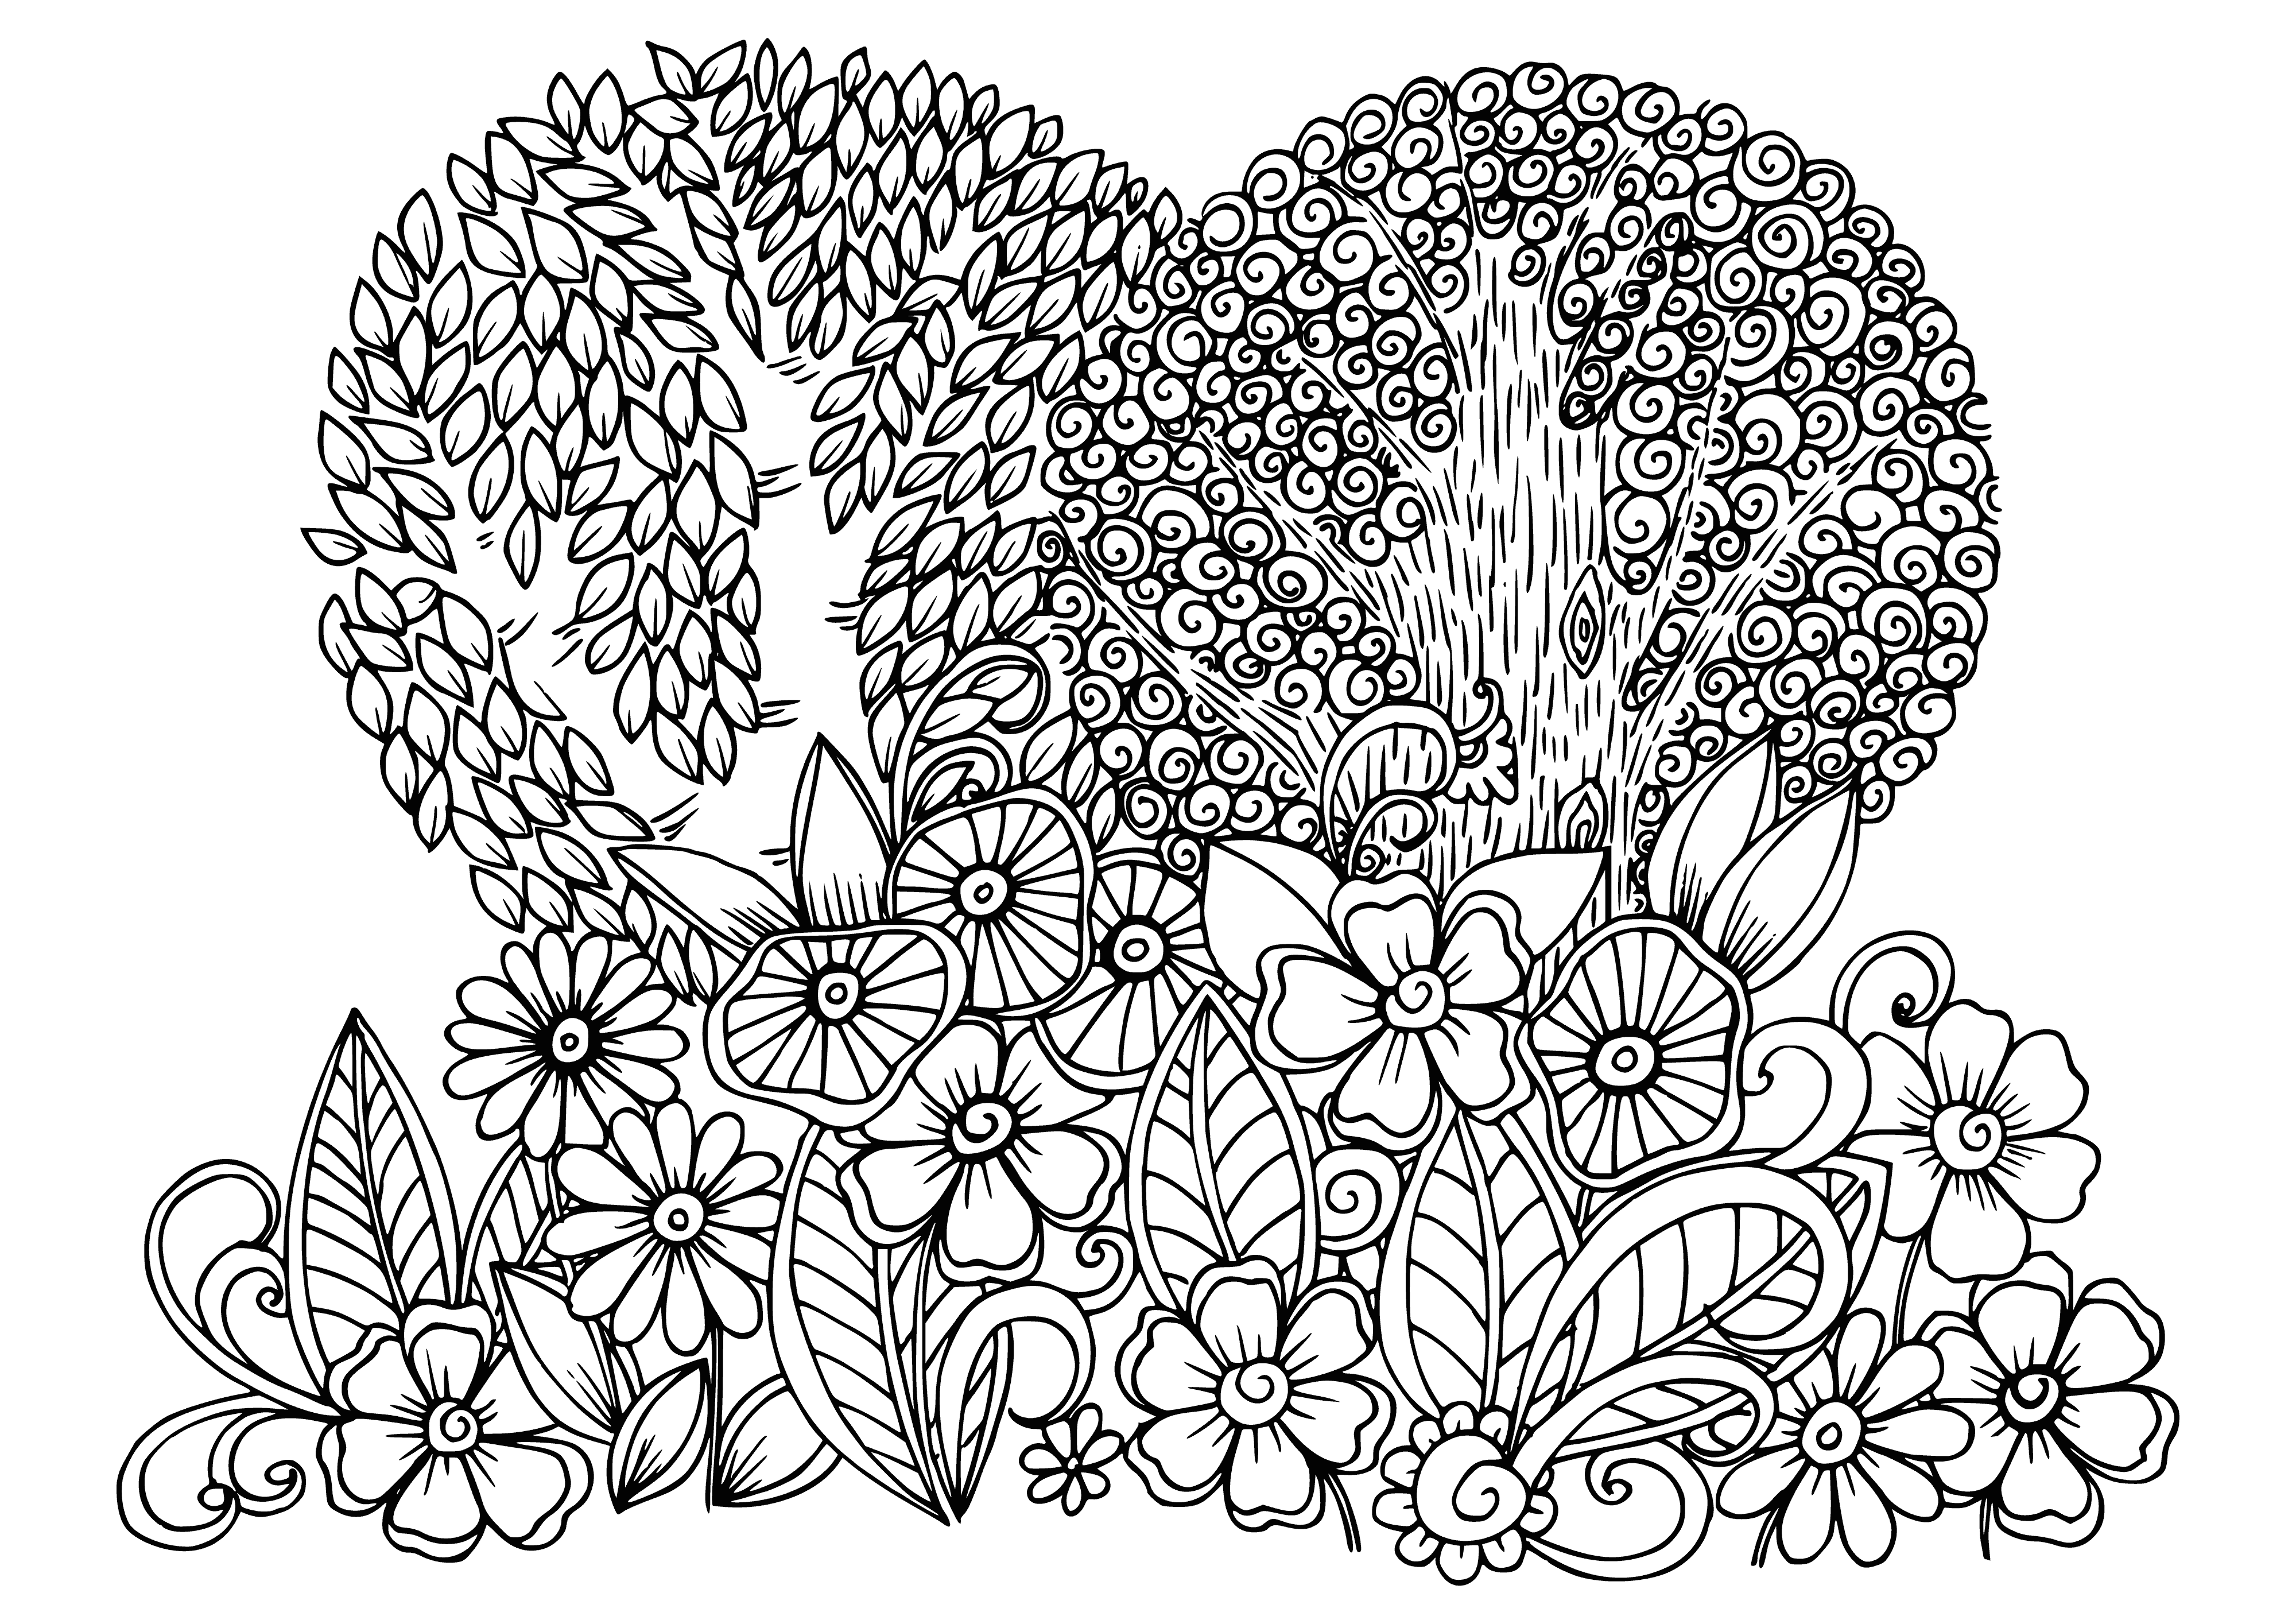 Nature coloring page